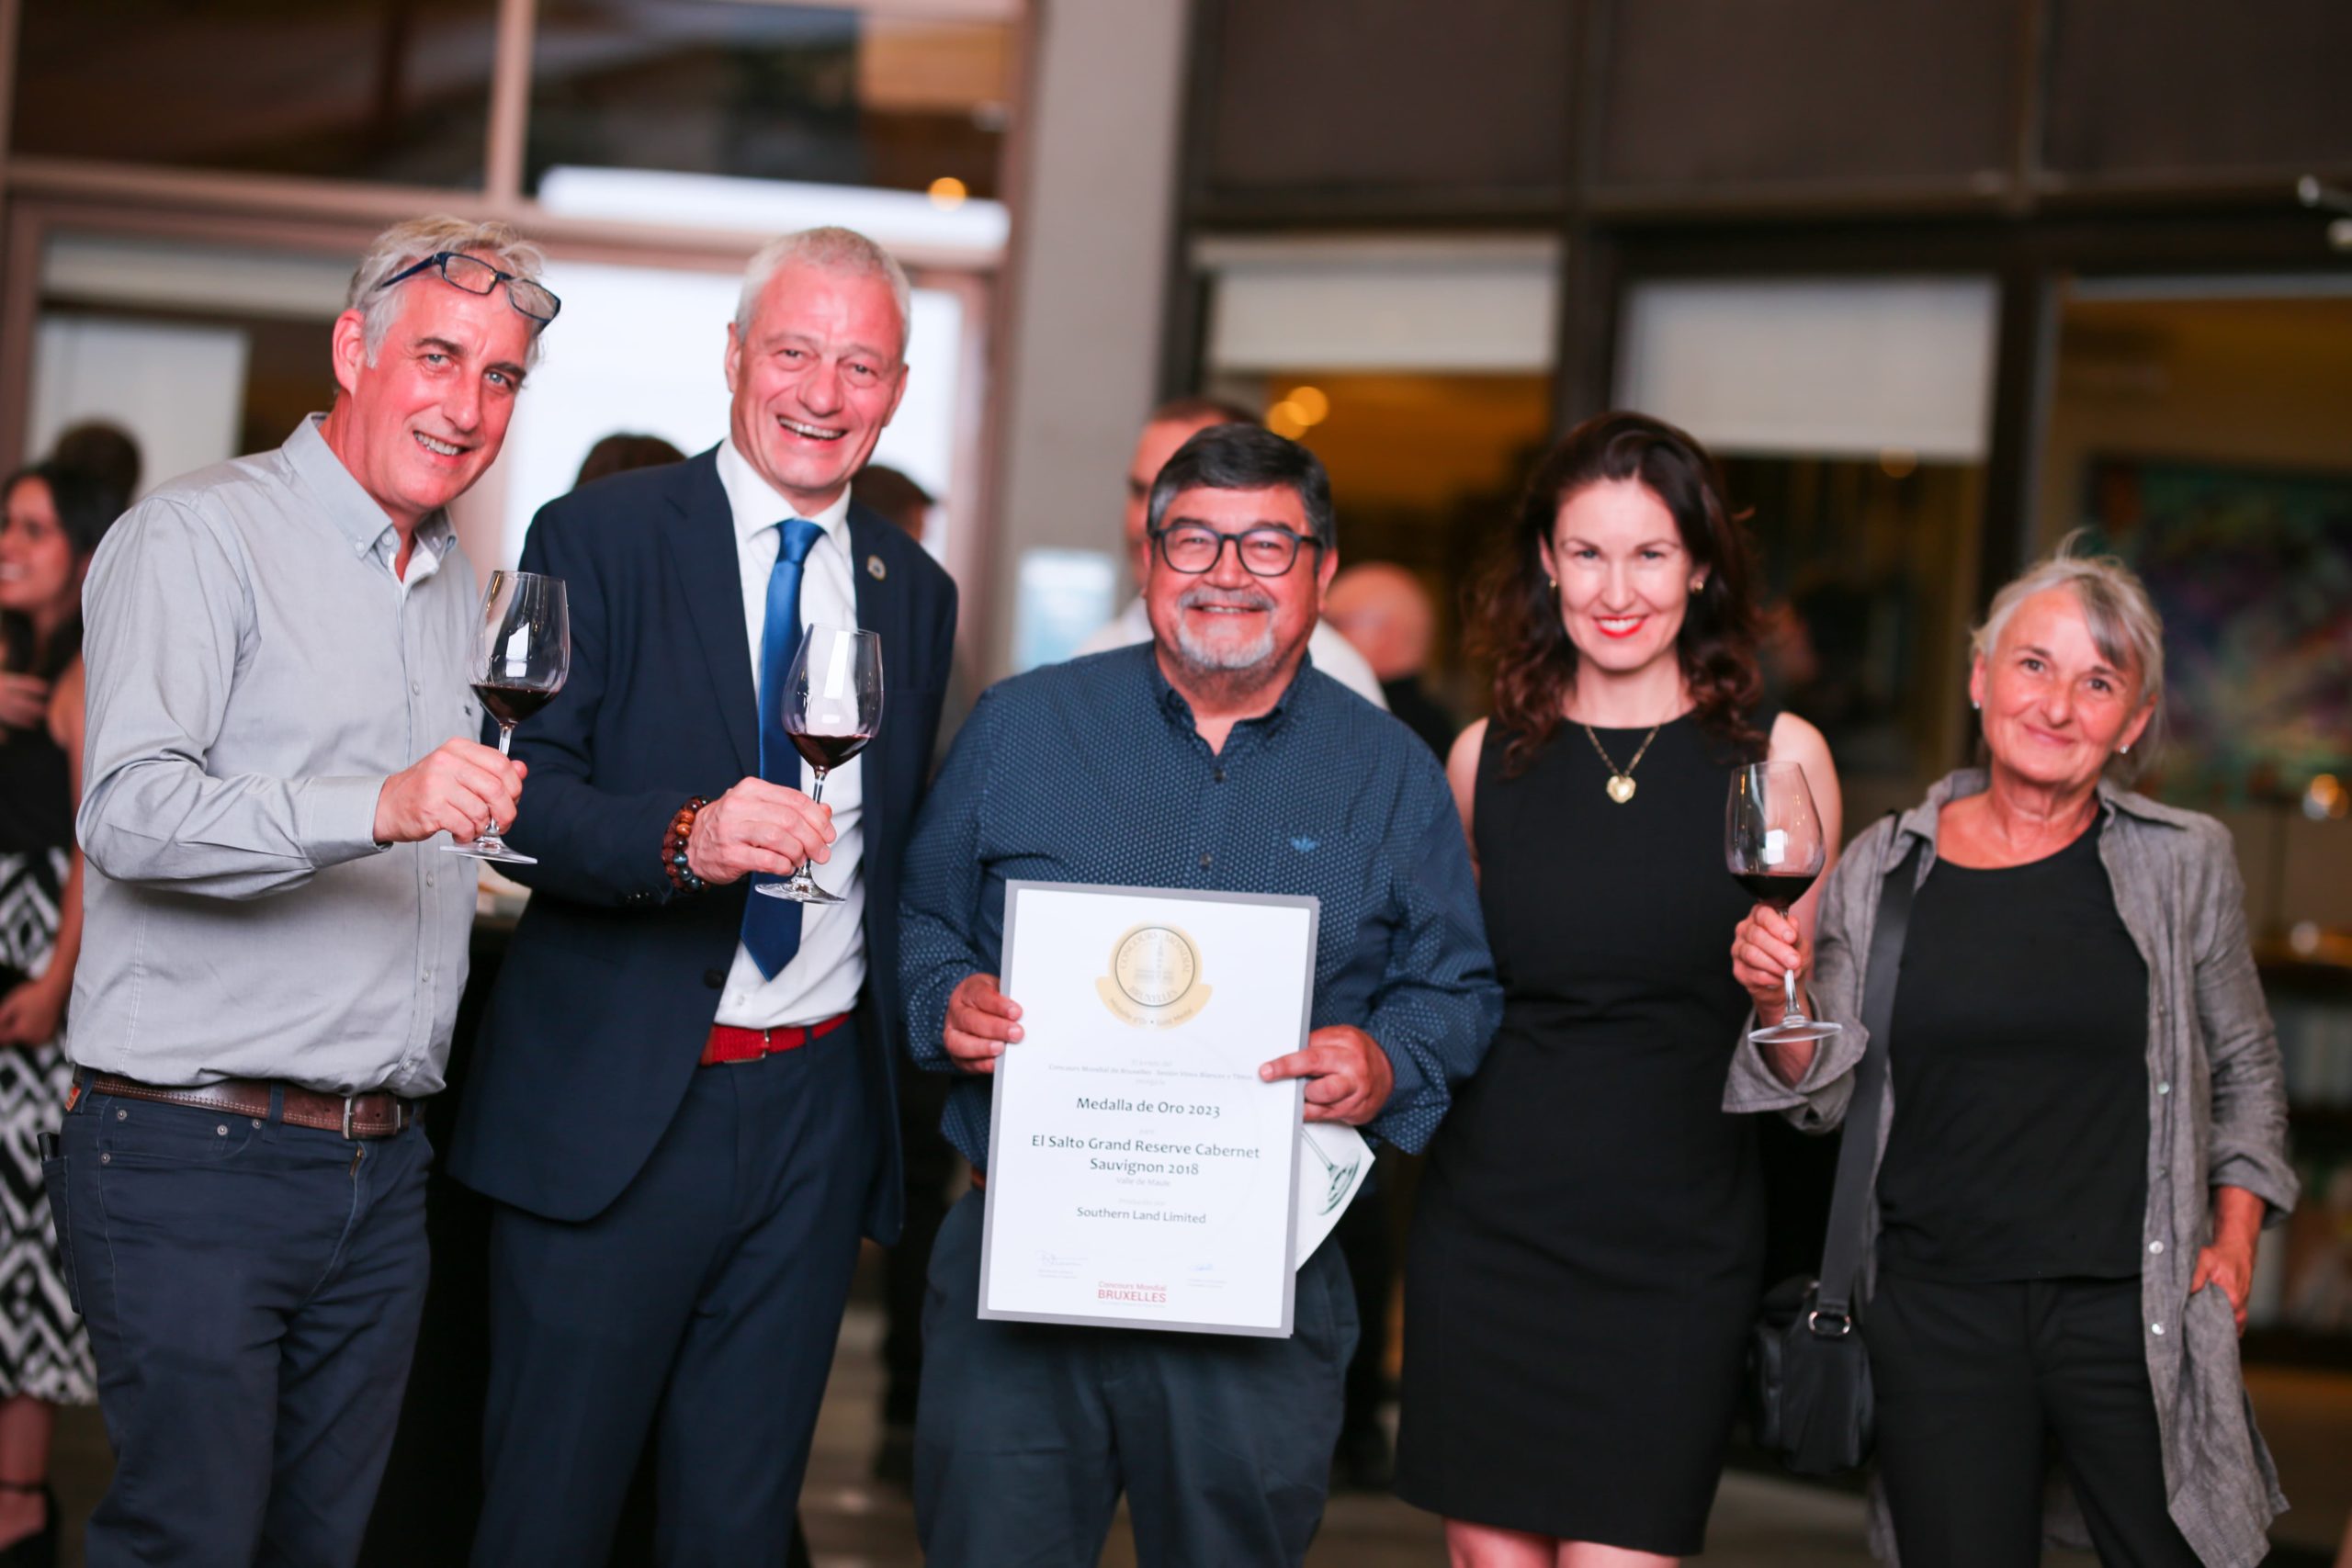 CMB celebrates the dedication and talent of award-winning Chilean wine producers